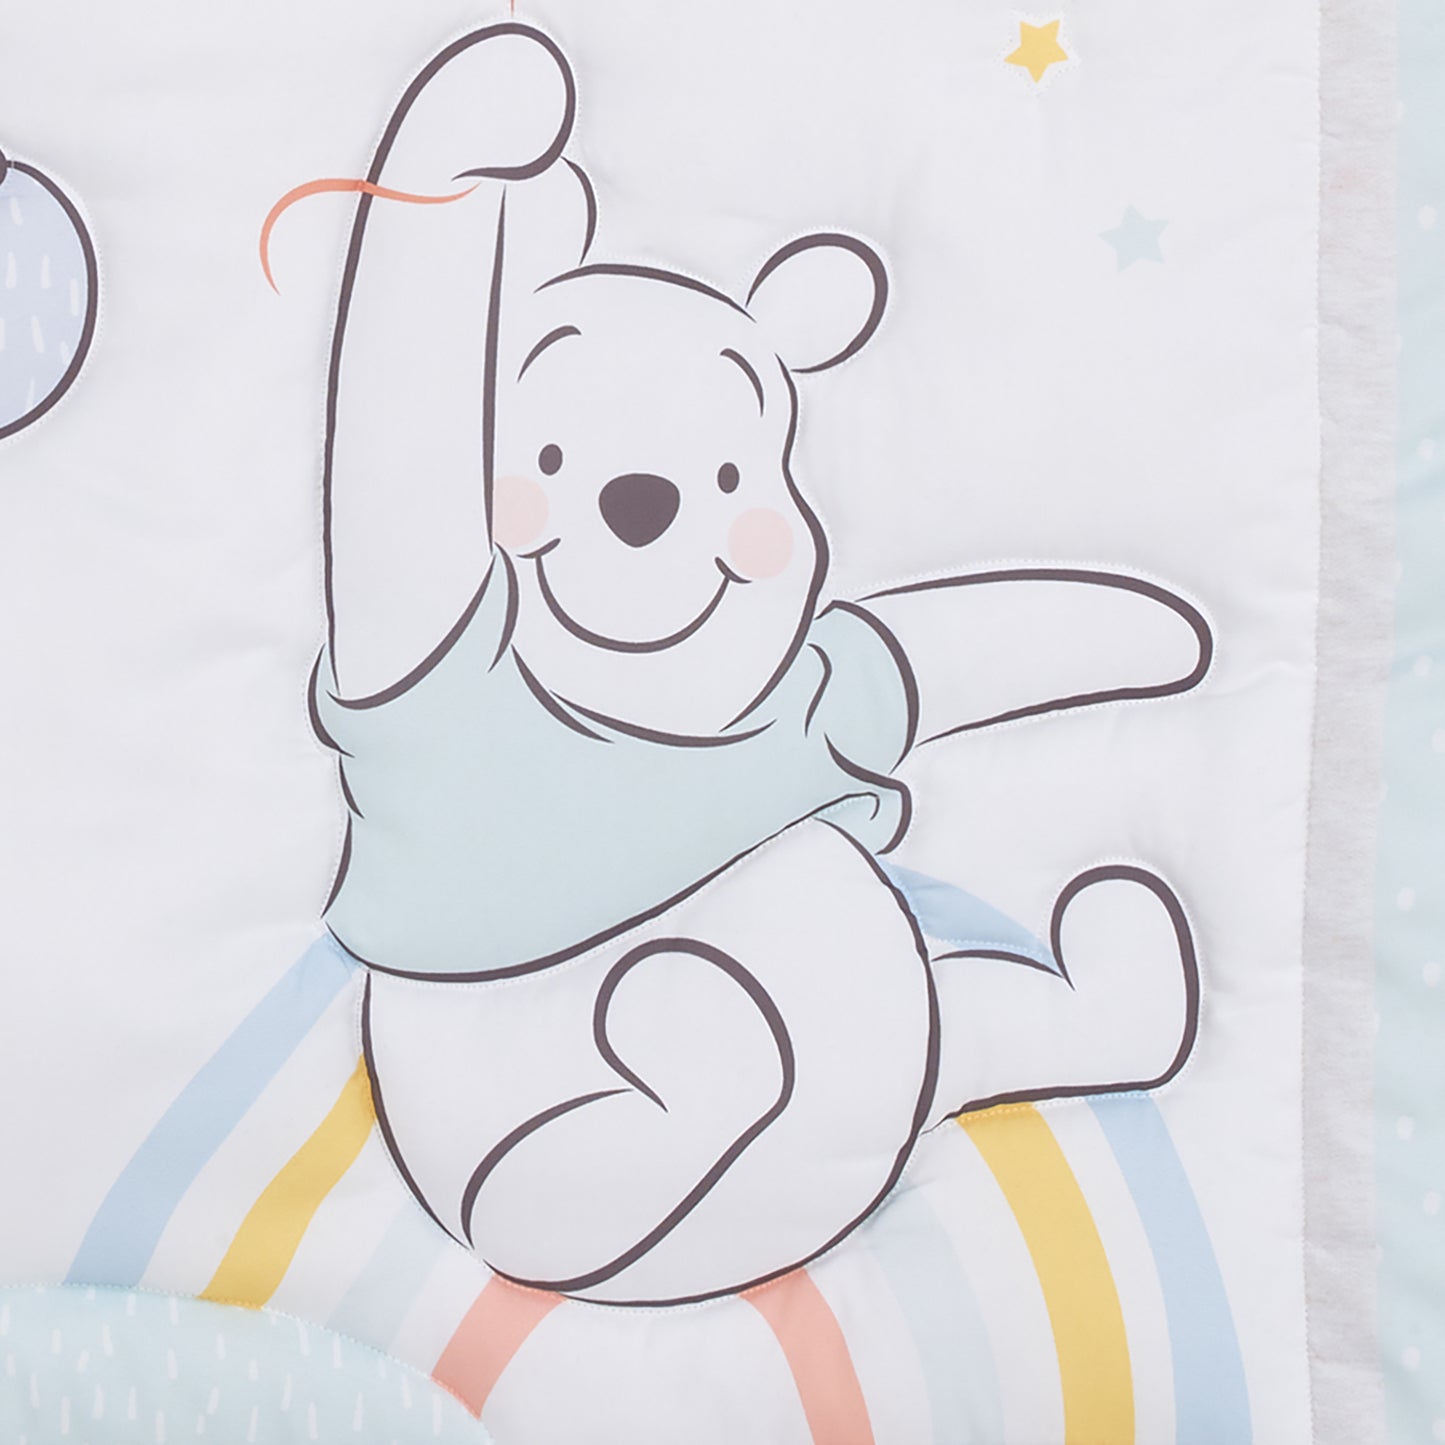 Disney Winnie the Pooh Hello Sunshine White and Aqua Piglet, Rainbow, Clouds, and Sun 3 Piece Nursery Mini Crib Bedding Set - Comforter and Two Fitted Mini Crib Sheets